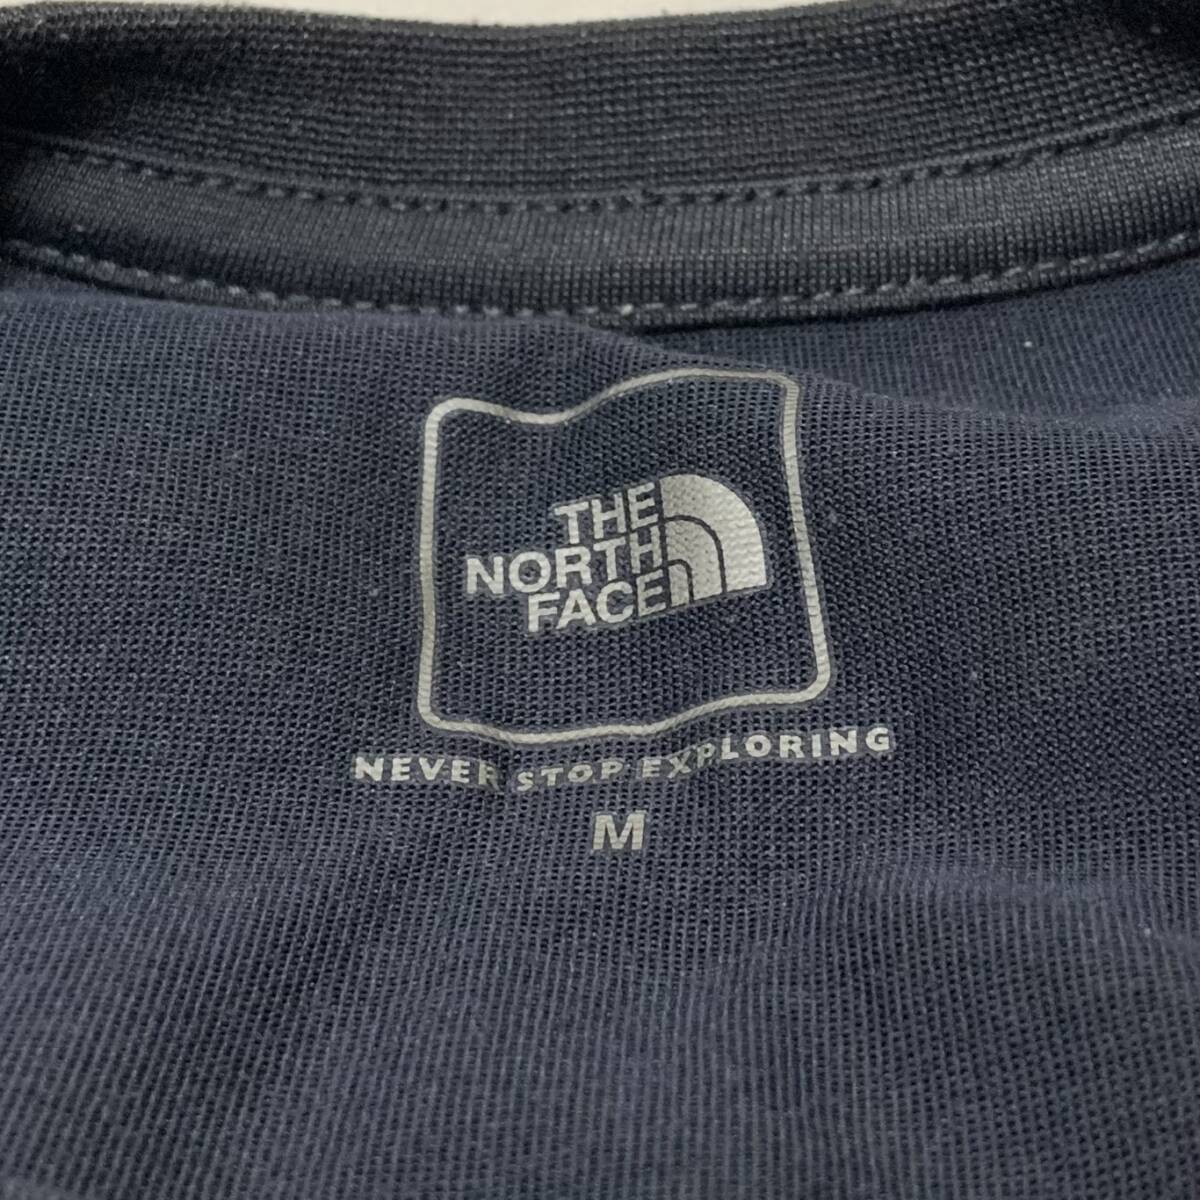 THE NORTH FACE! 長袖Tシャツ! ロンTEE! 両面プリント! ロゴ! カラードーム! Color Dome! NT81500! ポリエステル 100%! SIZE M_画像3